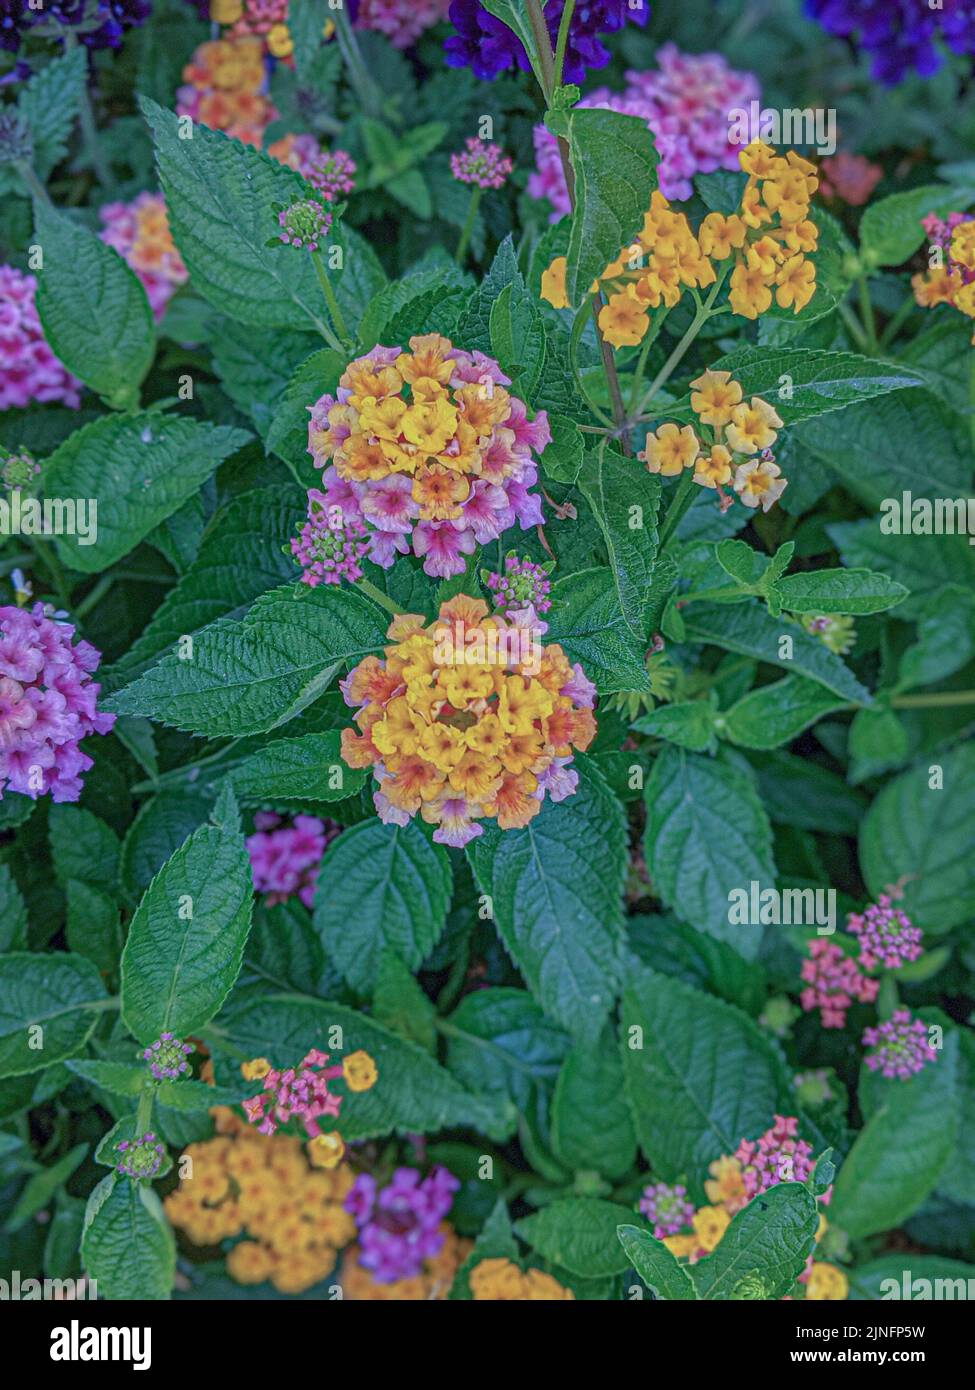 Beautiful flowerbed with pink and yellow tiny flowers and green lush foliage Stock Photo